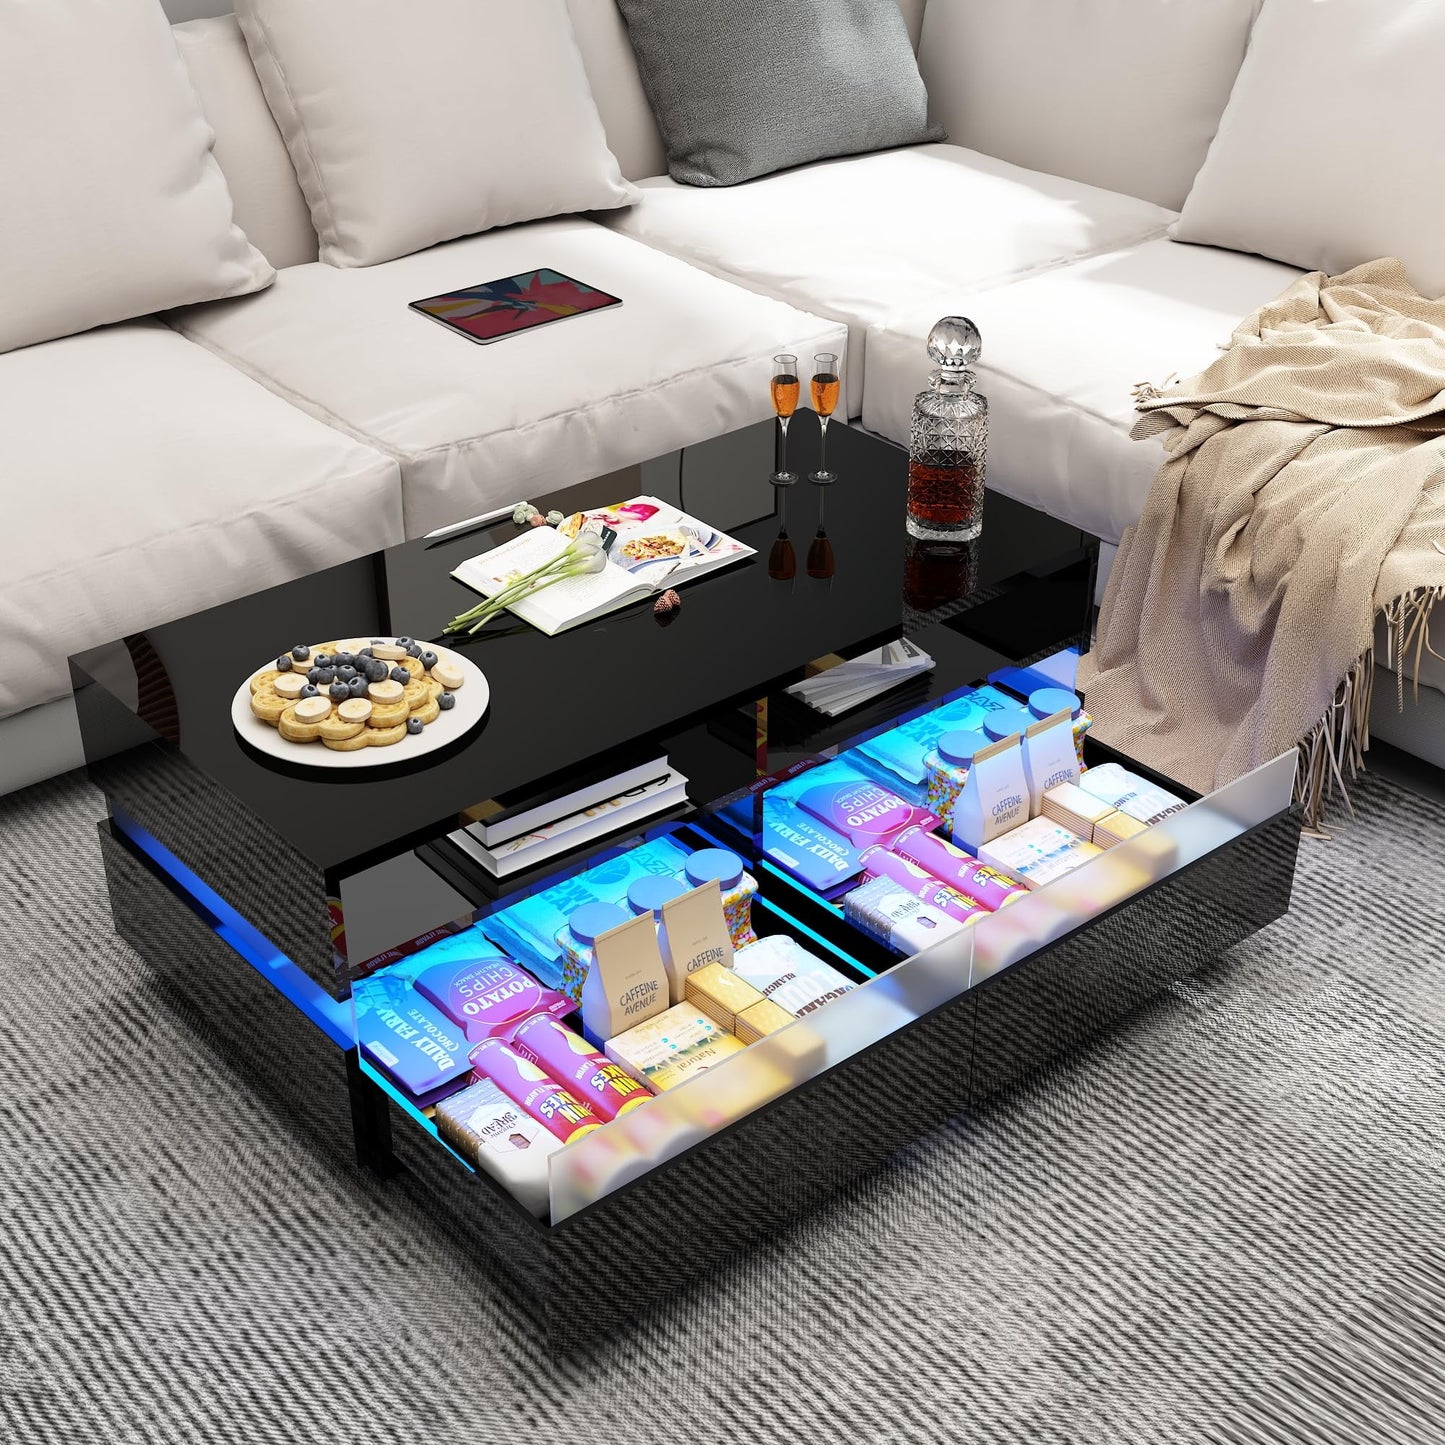 Modern LED Coffee Table W/ 2 Storage Drawers,High Glossy 2-Tier Black Coffee Table W/ 60000-Color LED Lights,App Control,Rectangle Center Table W/Open Shelf for Living Room Bedroom